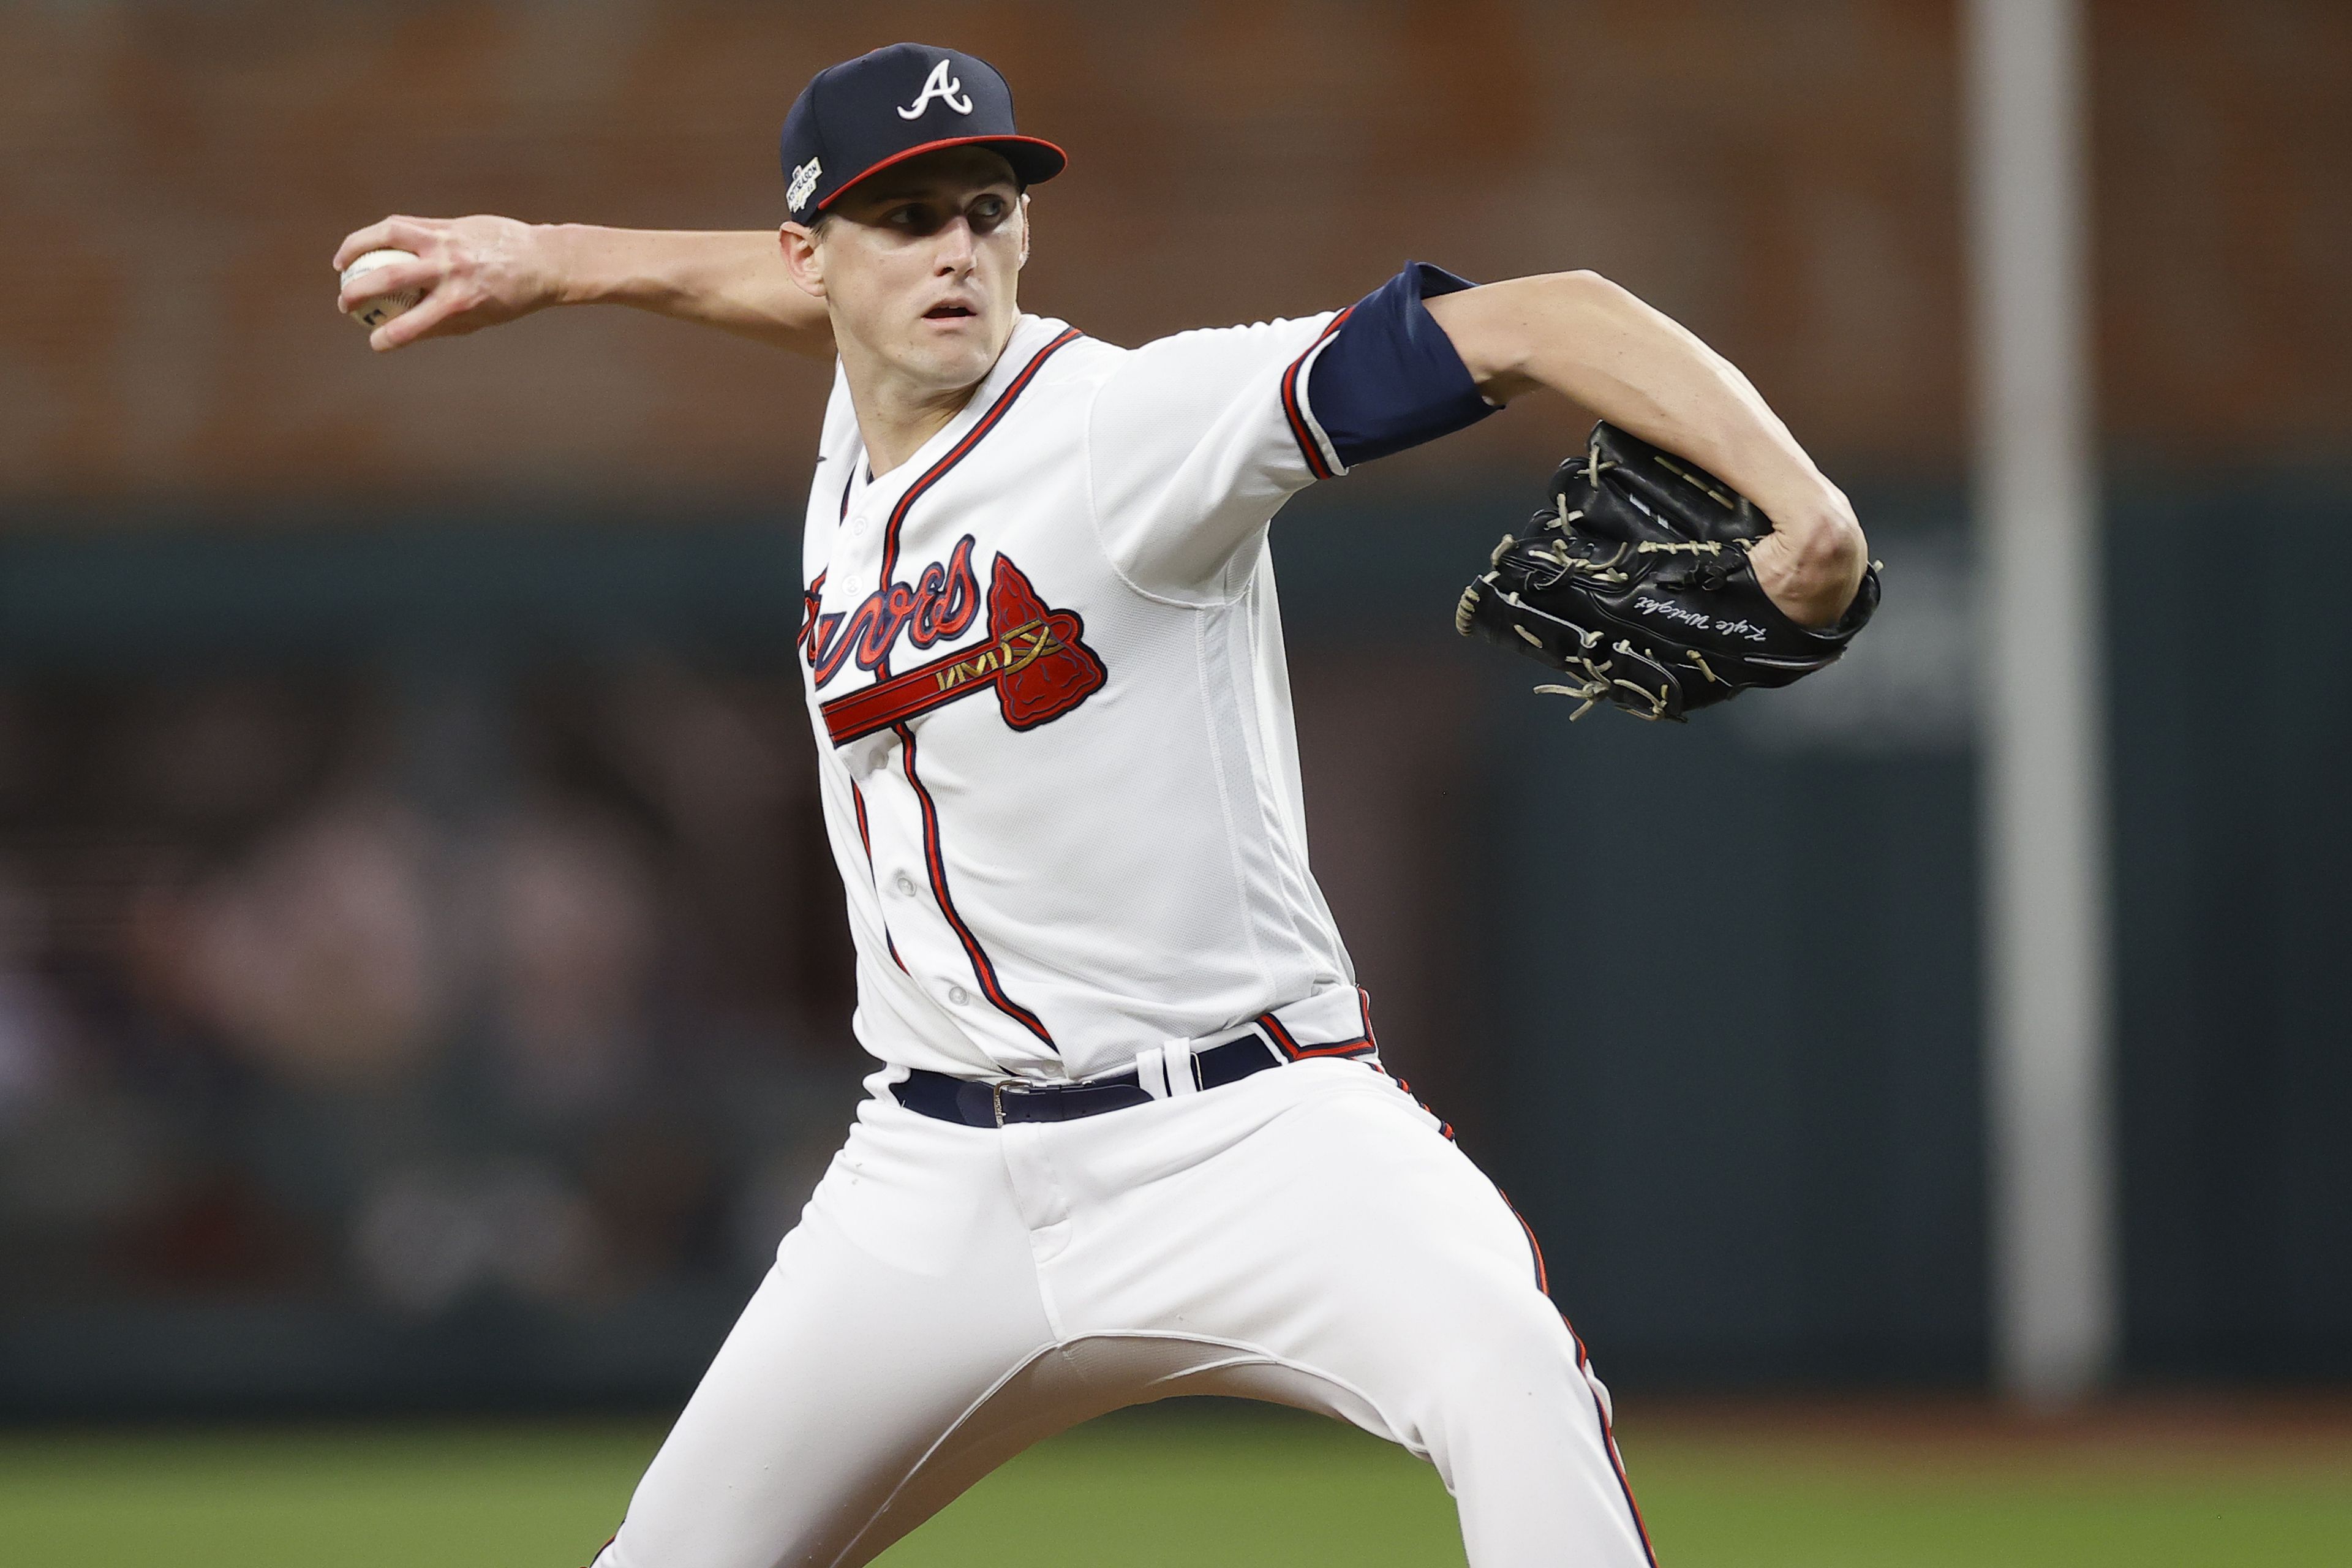 Wh atlanta braves jerseys at time is the World Series tonight? TV schedule,  channel to watch Astros vs. Braves Game 5 Atlanta Braves Jerseys ,MLB  Store, Braves Apparel, Baseball Jerseys, Hats, MLB